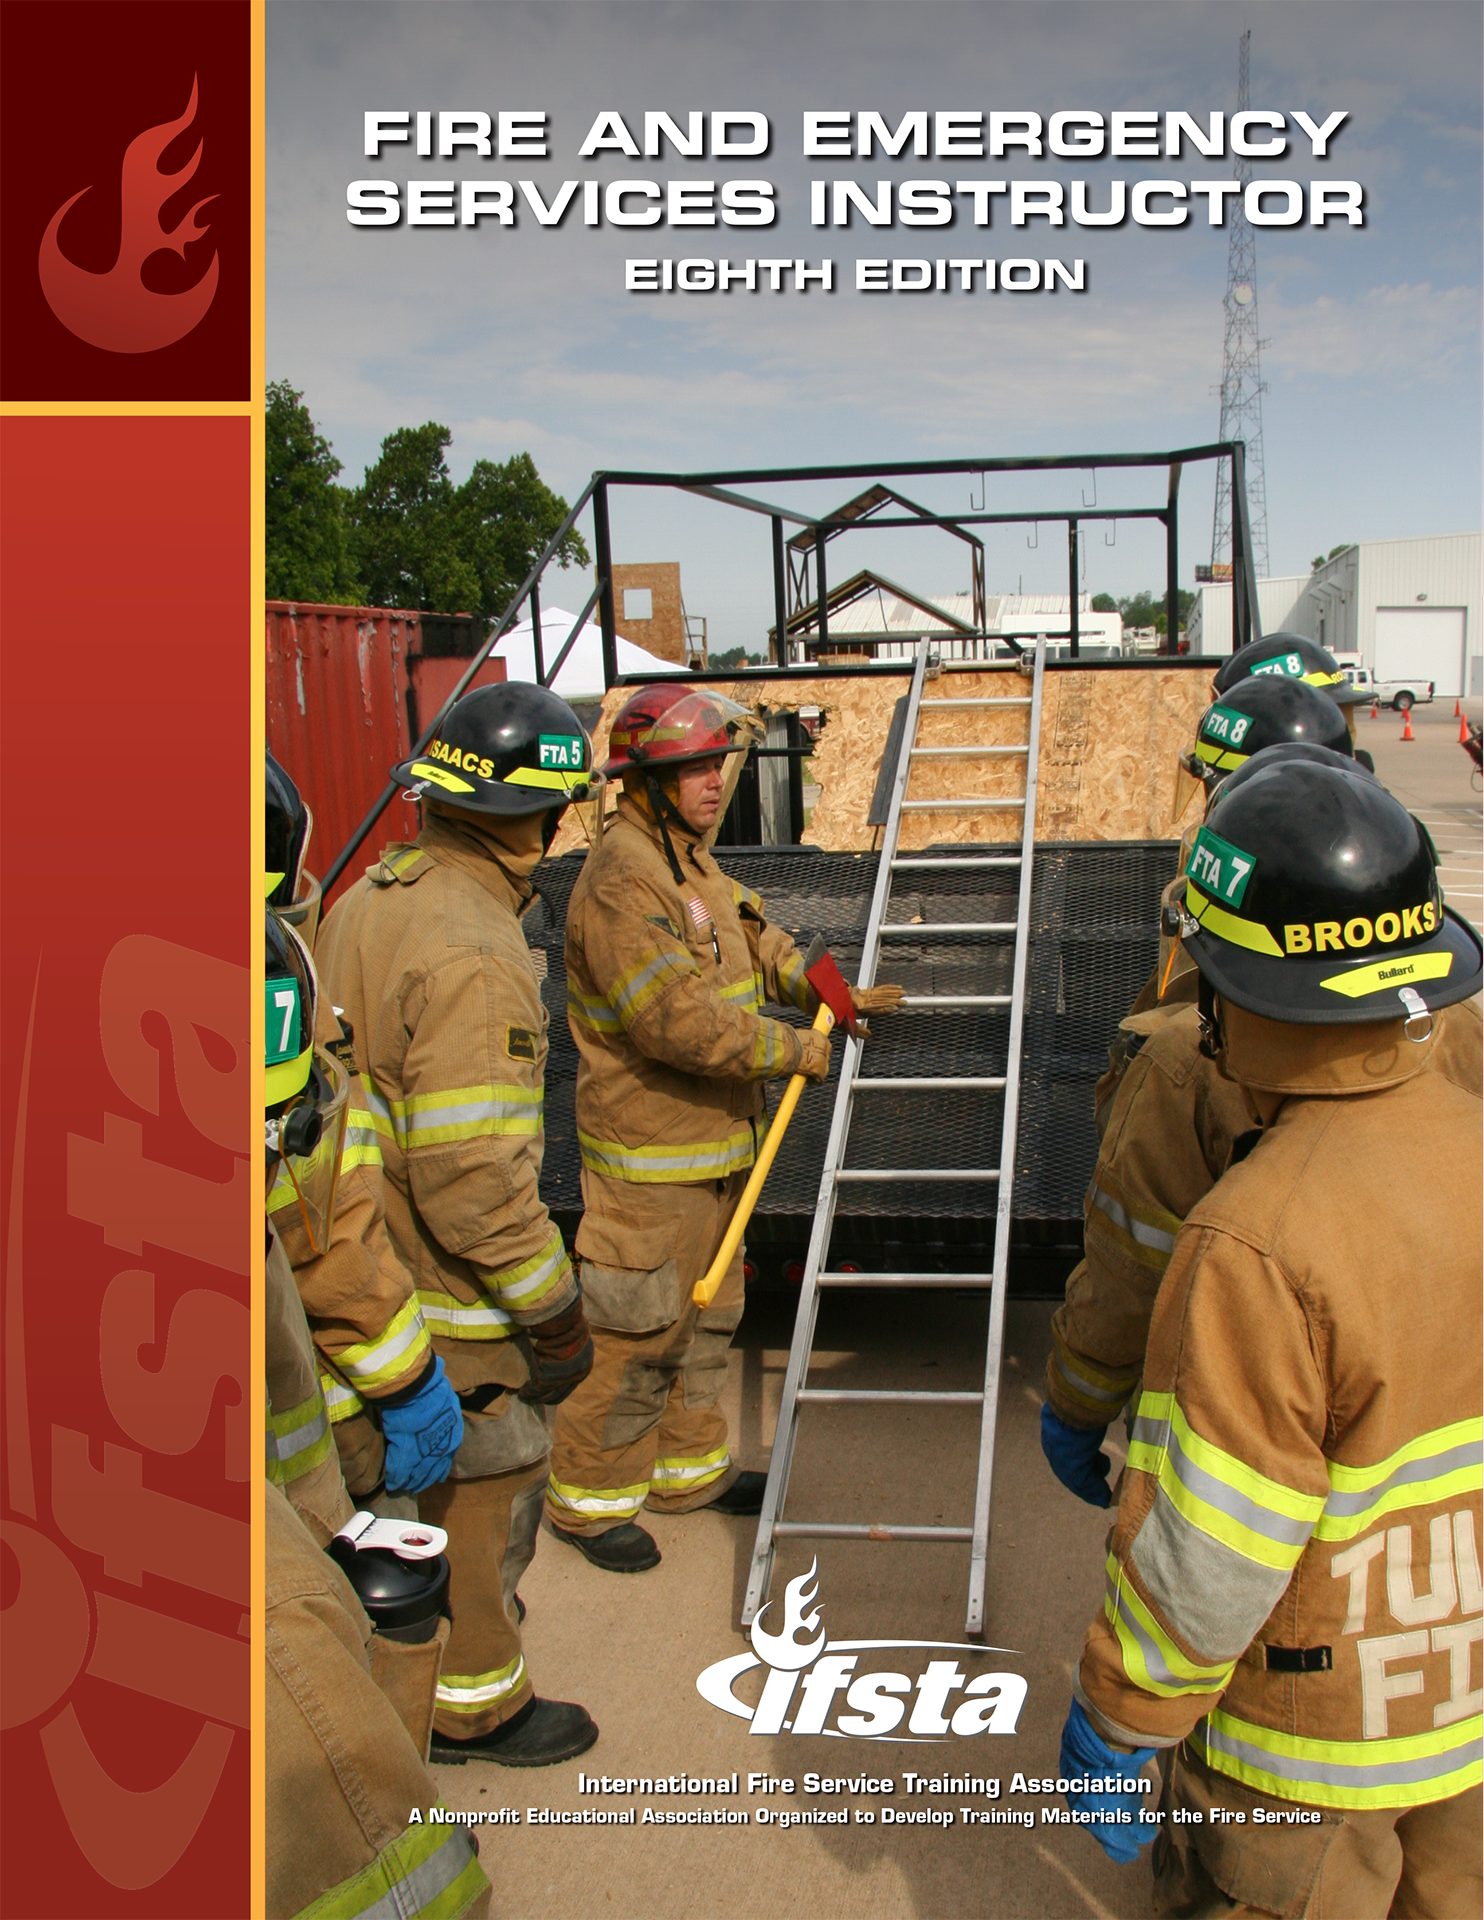 Fire and Emergency Services Instructor, 8th Edition